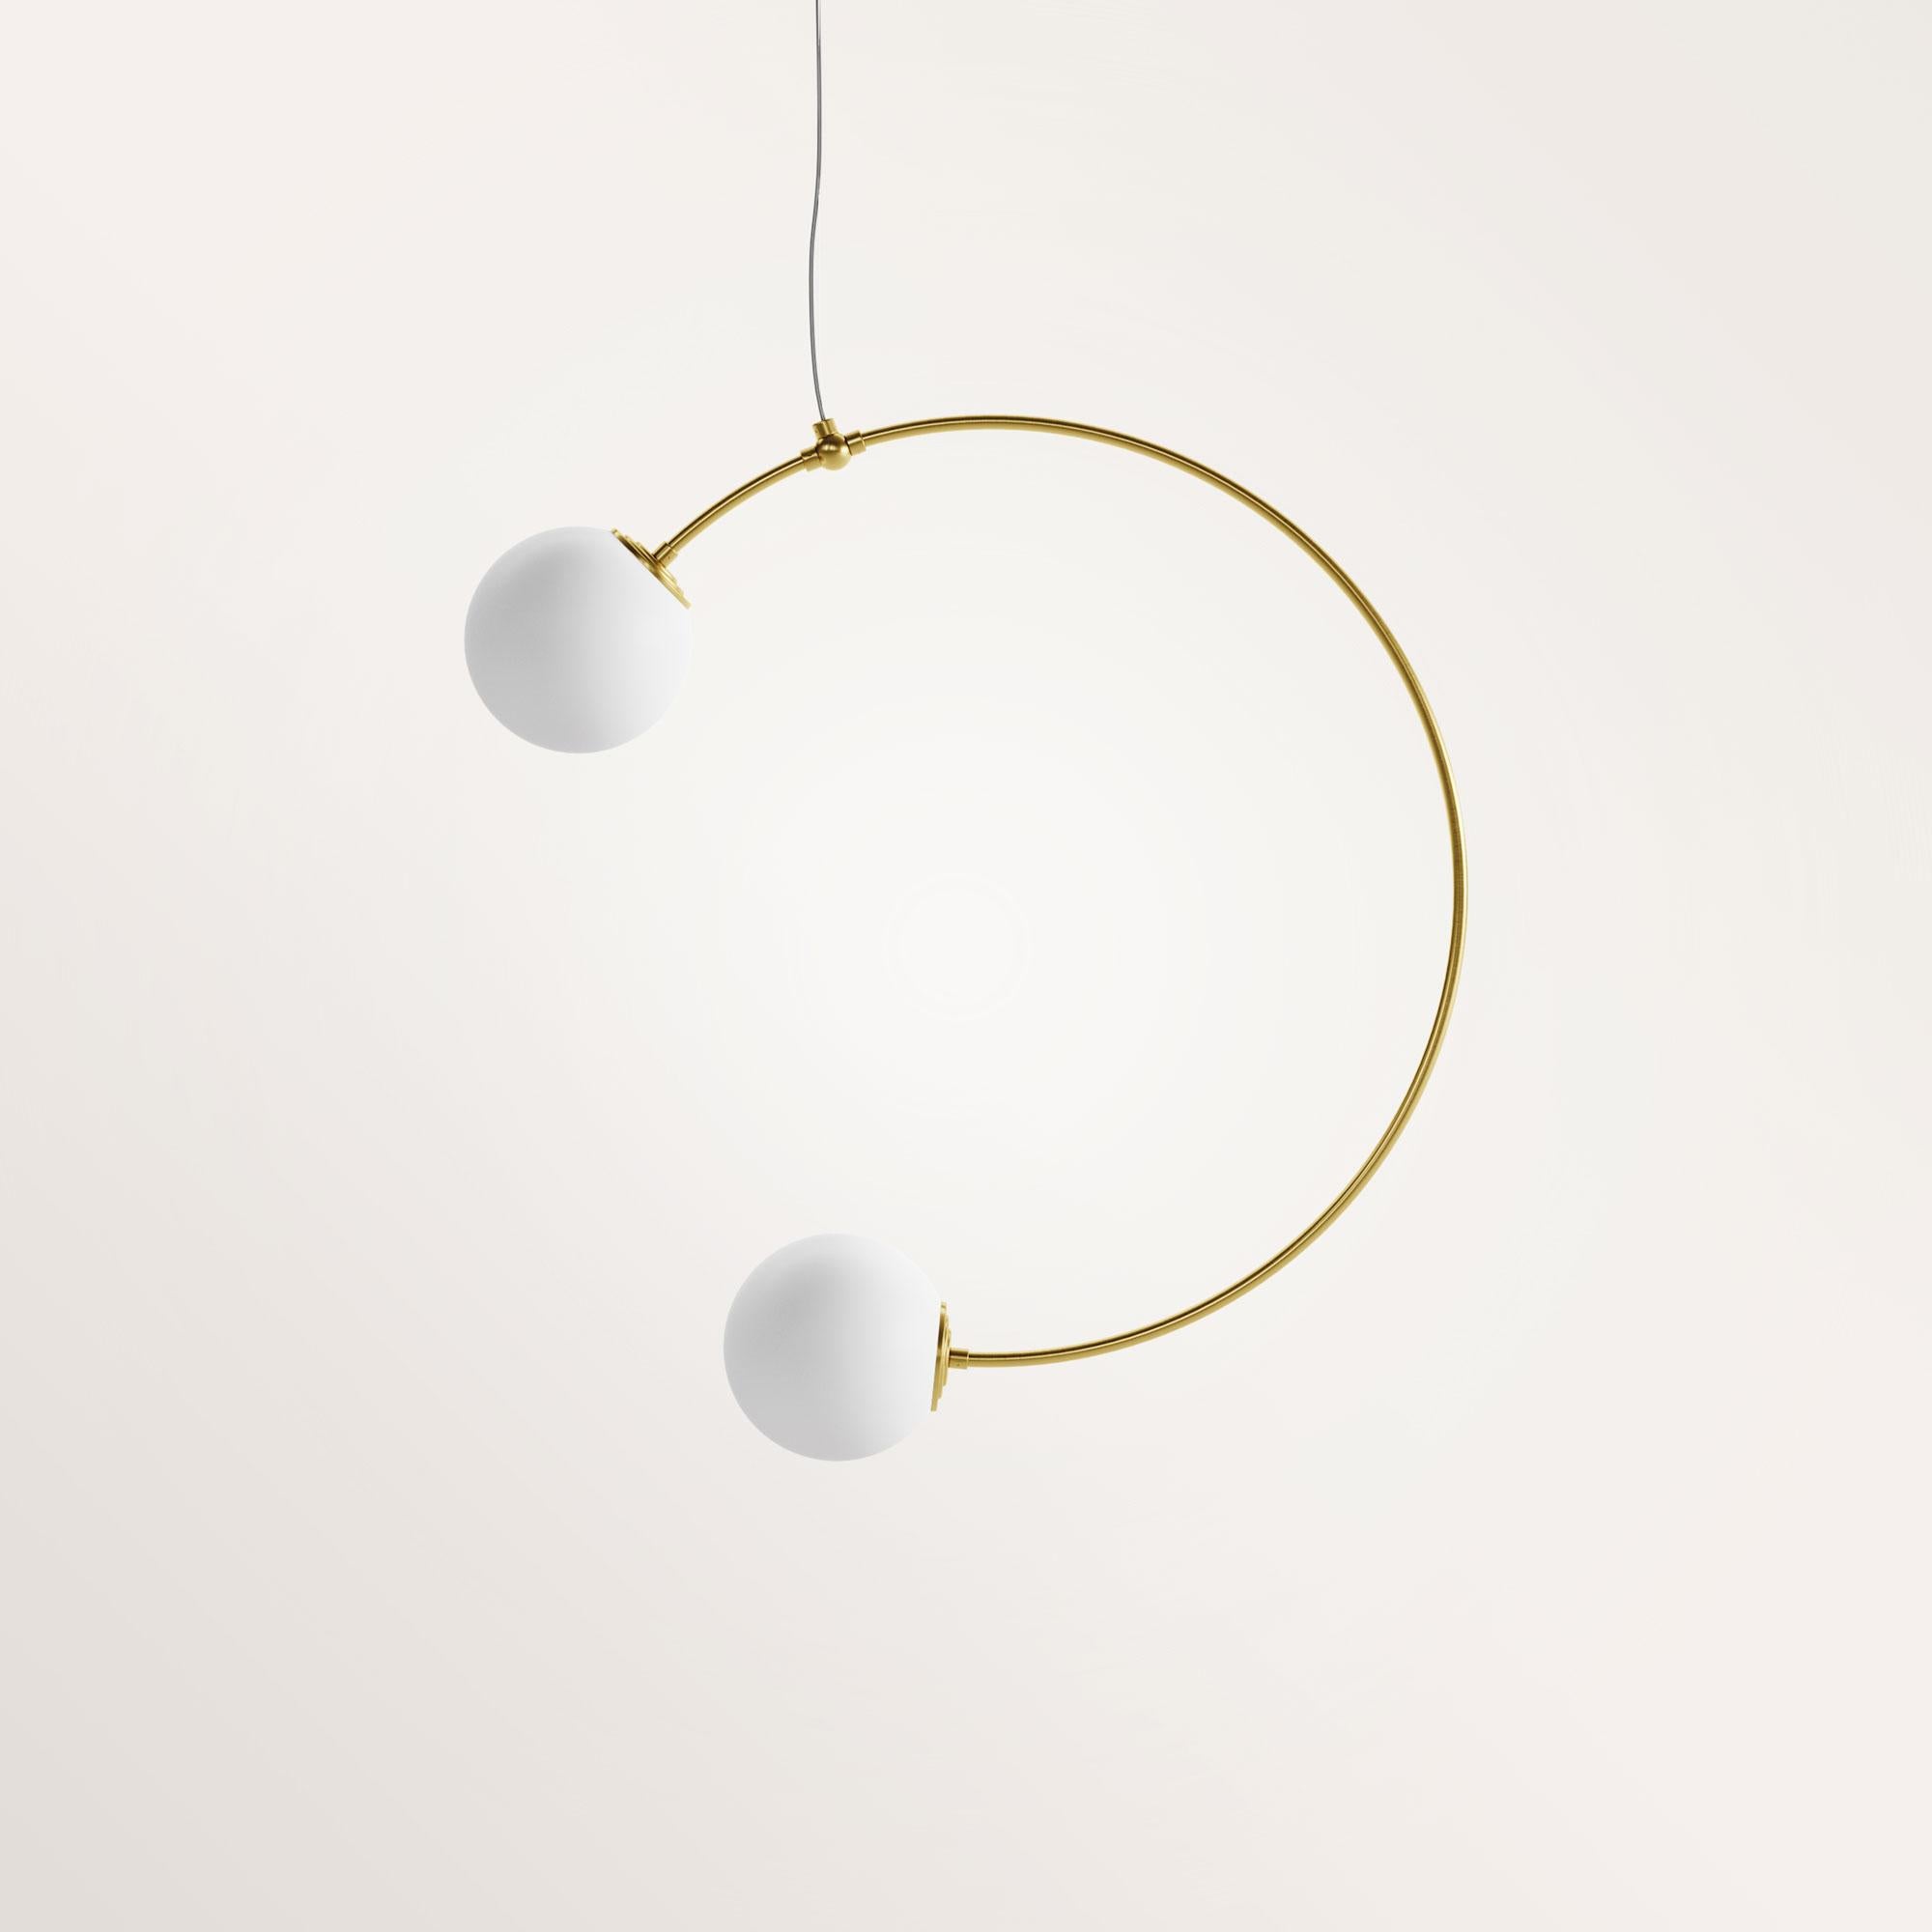 Handmade small Selene chandelier by Gobo Lights
Dimensions: Ø 55 X l.12 x H 55
Materials: Brass, Opaline

Selene, the brightest object in the darkness of the night.

Self-taught and from the world of chemistry, this Belgian craftsman /